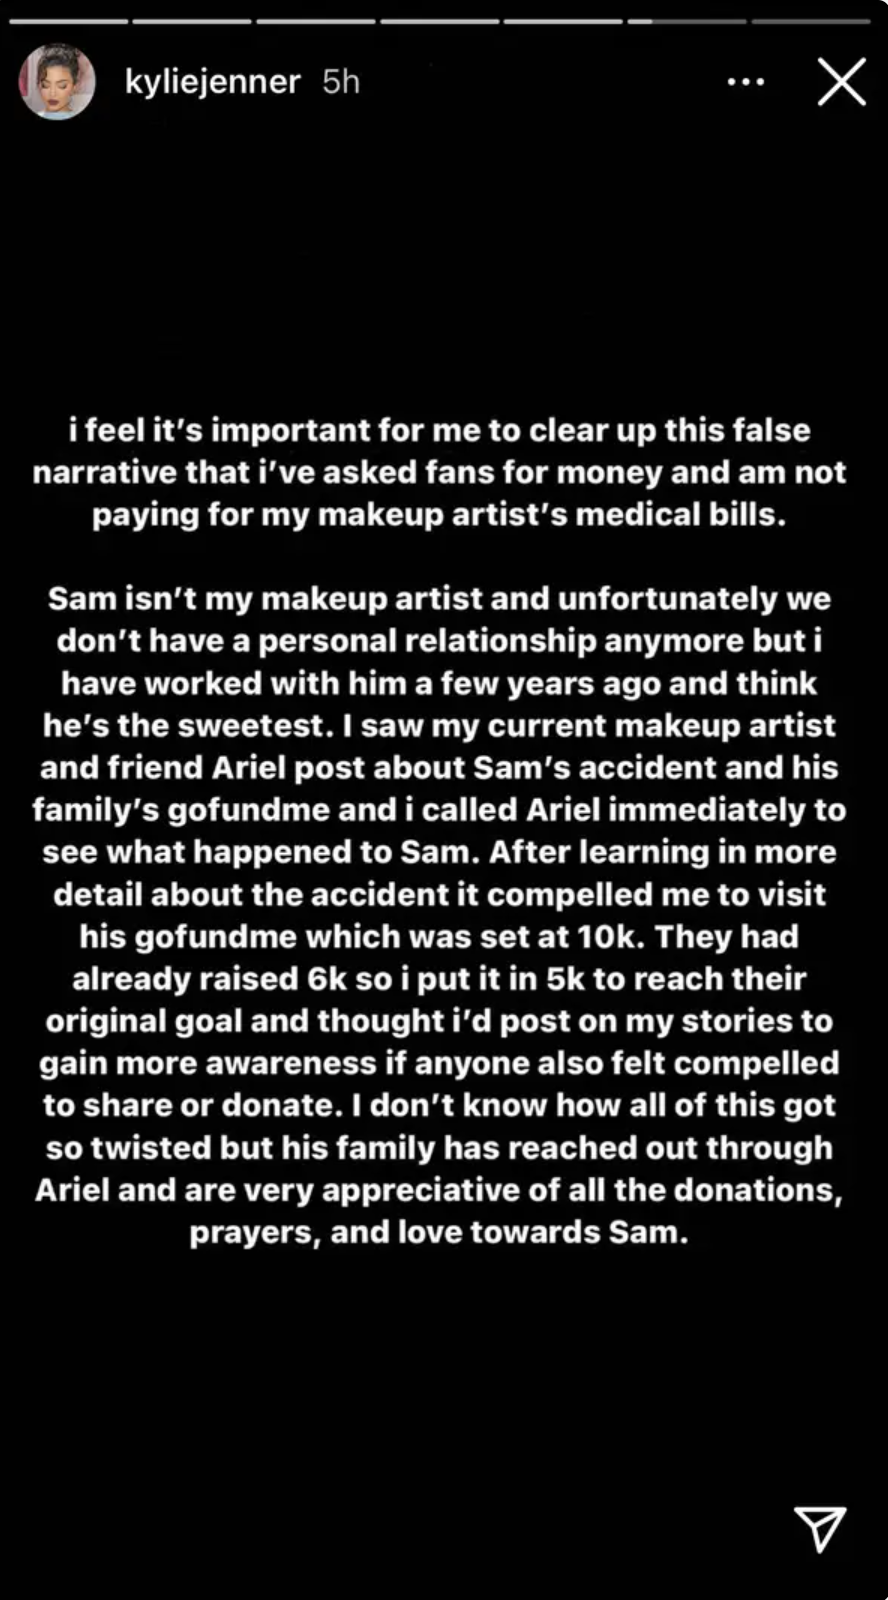 An iOS press release from Kylie Jenner addressing the GoFundMe scandal of her former makeup artist